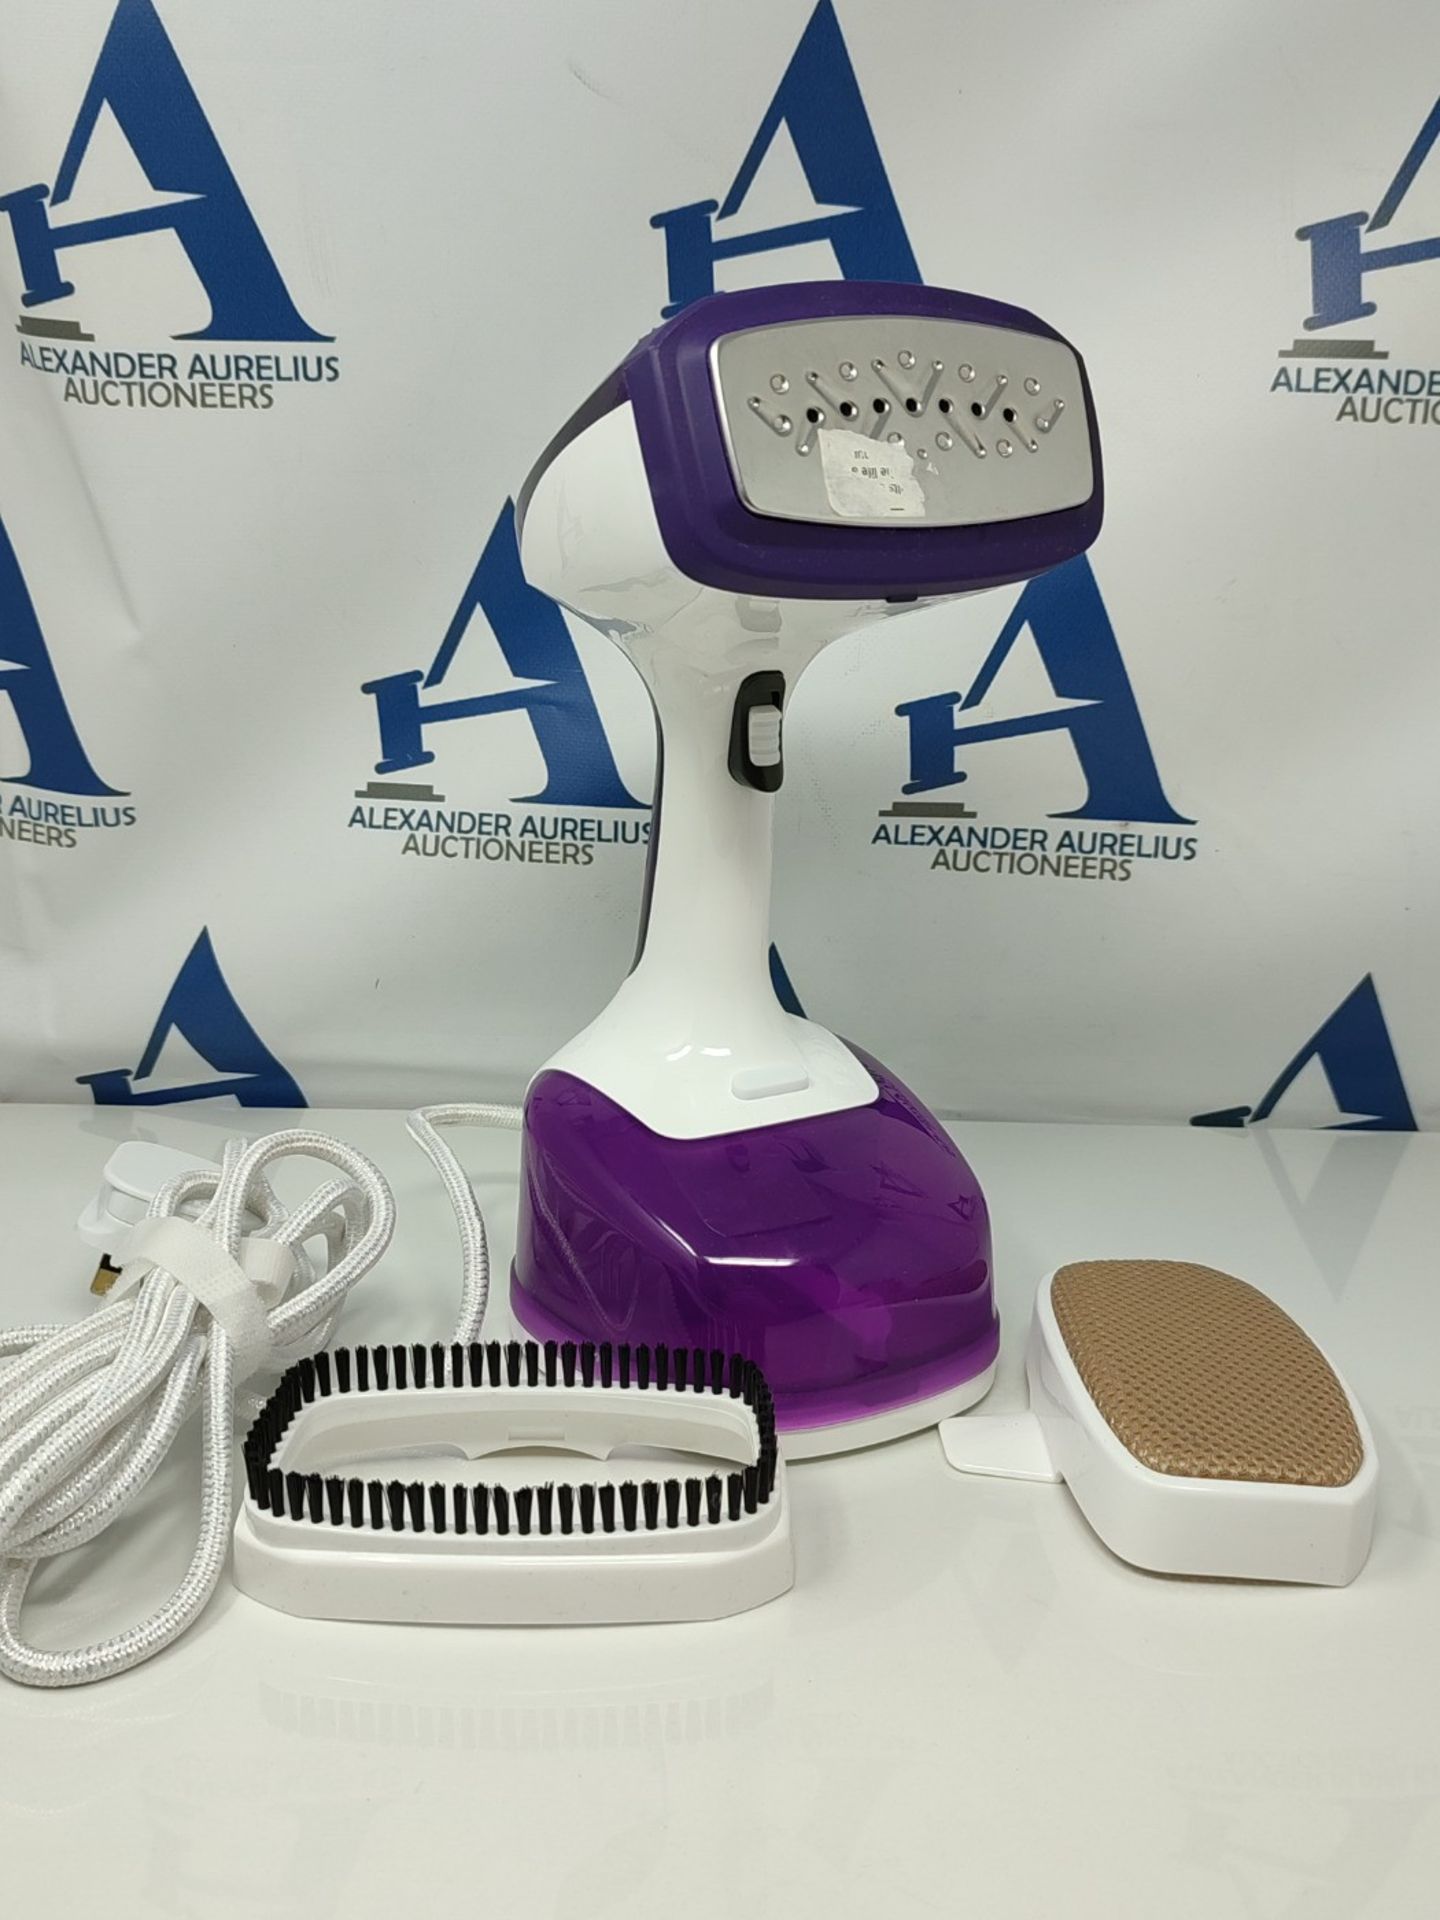 Verti Steam Pro by Drew&Cole with Press Pad 3 in 1 Vertical Garment Steamer, Iron, Ste - Image 2 of 2